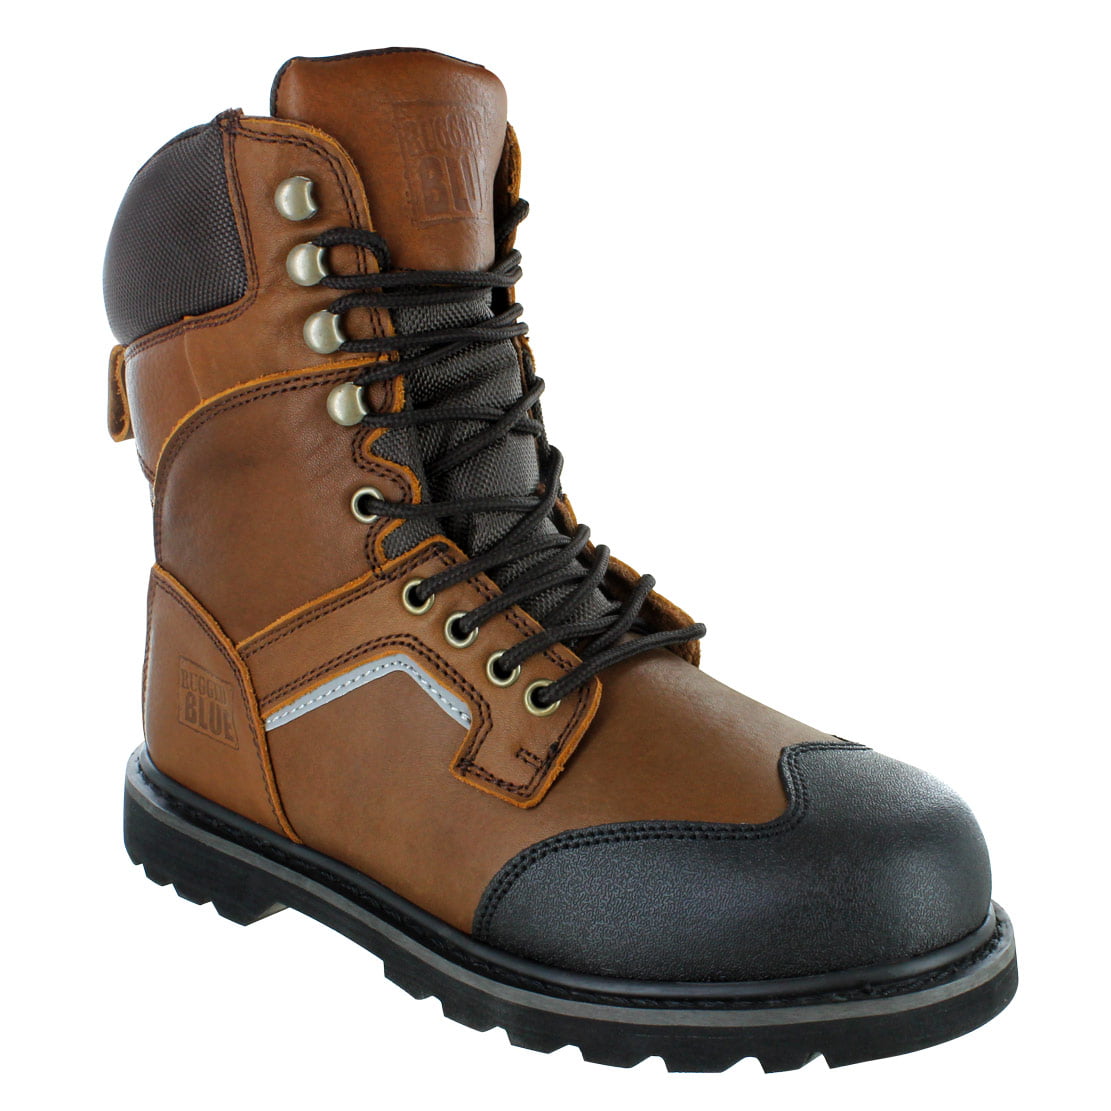 rugged blue work boots